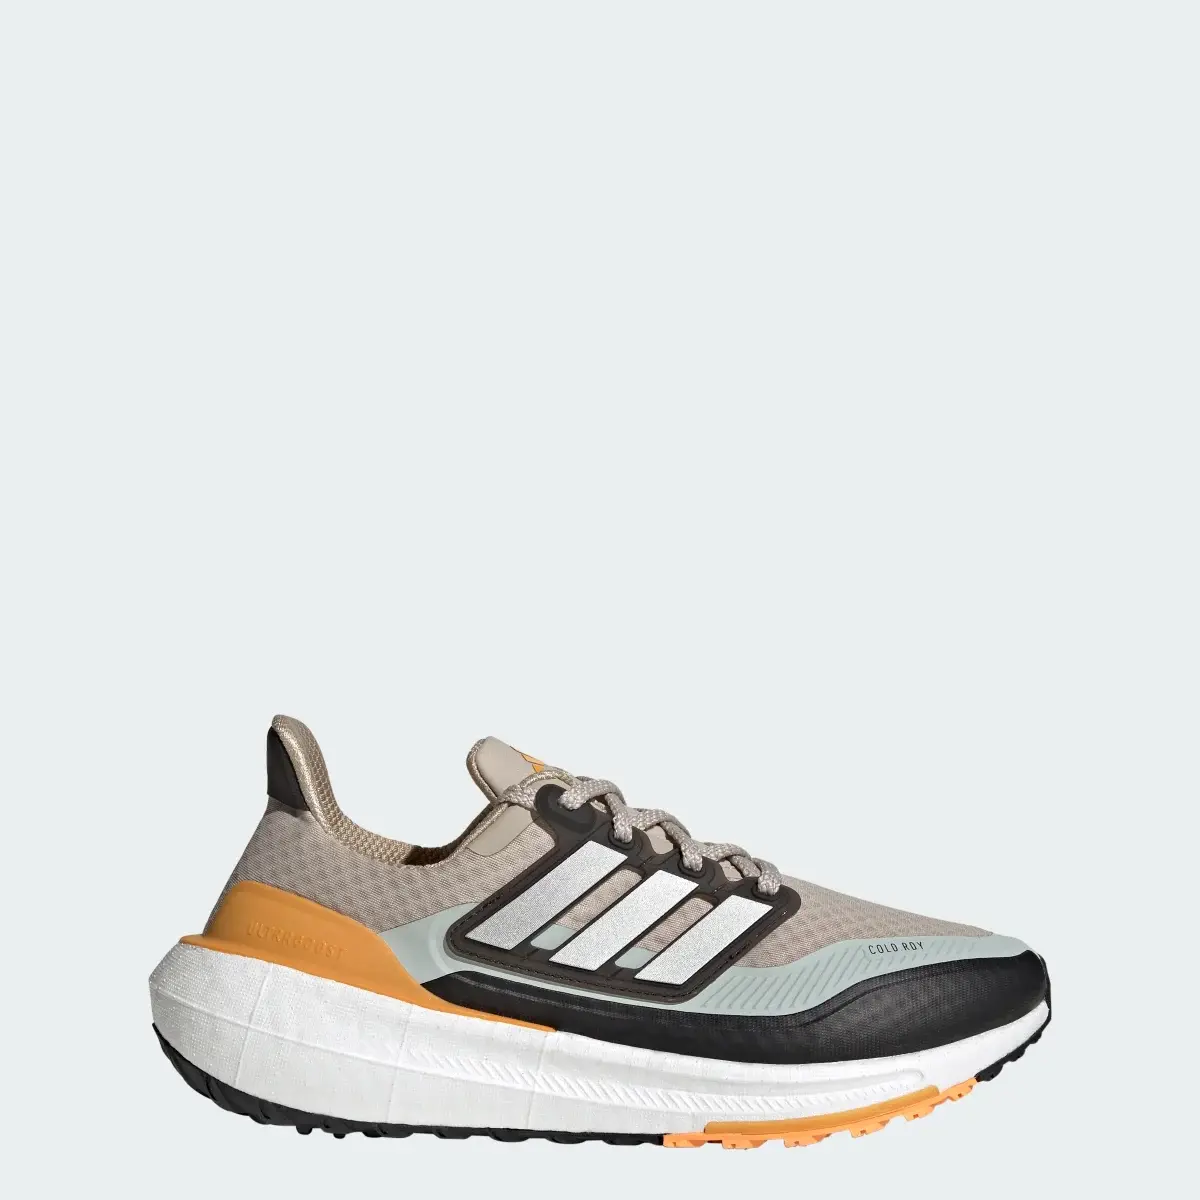 Adidas Ultraboost Light COLD.RDY 2.0 Shoes. 1